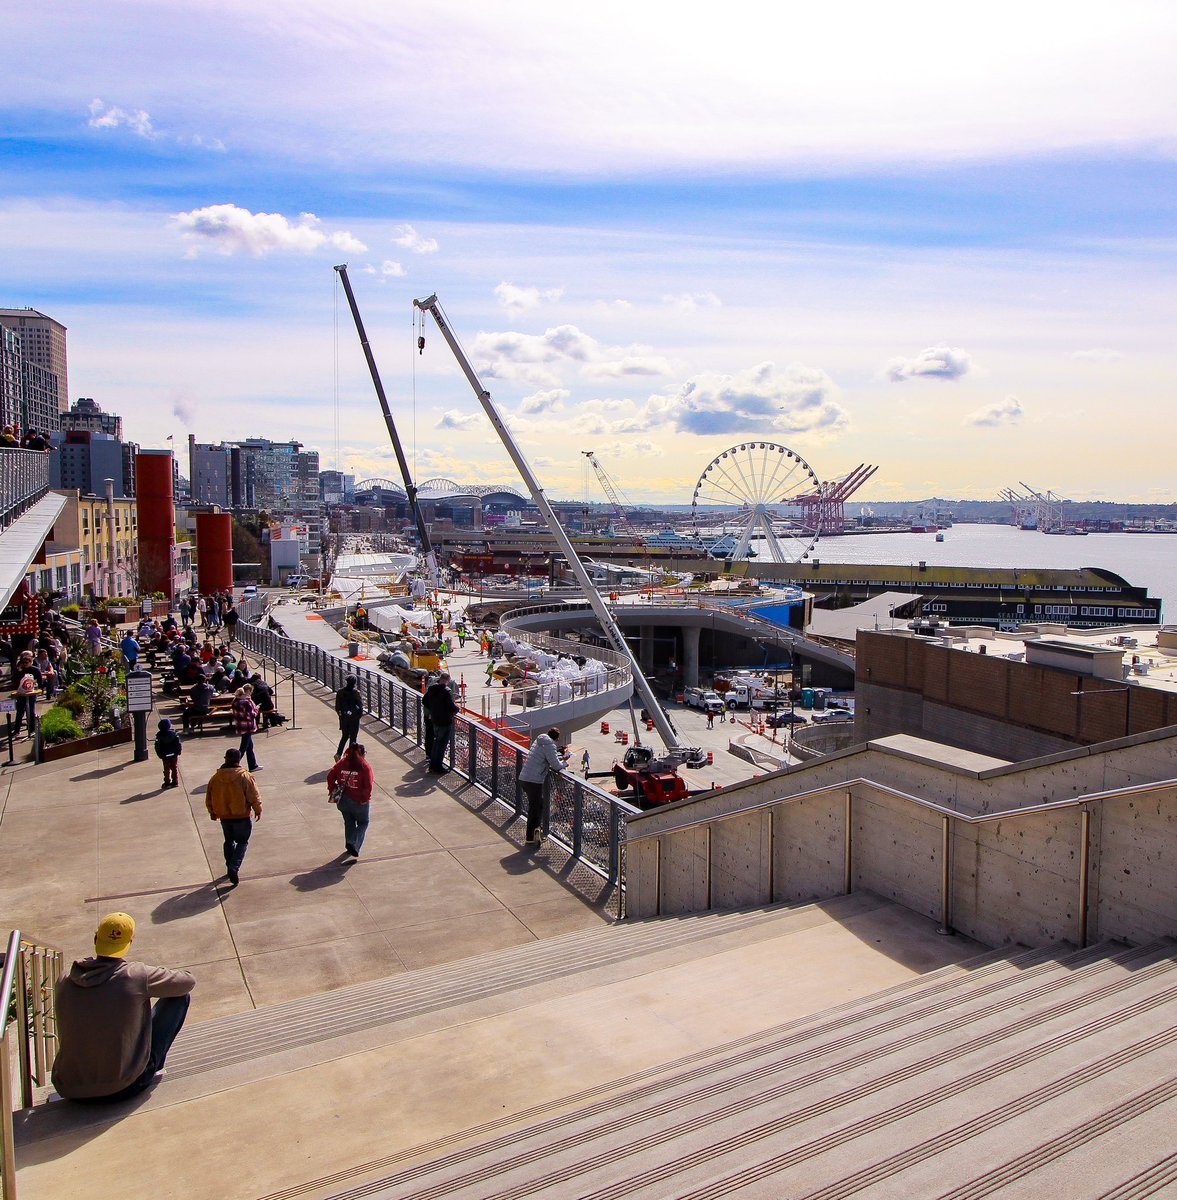 A lot is happening off our MarketFront Sundeck. 👀 The Overlook Walk will be completed in 2025, connecting #PikePlaceMarket to the @WaterfrontSEA and the Seattle Aquarium. Grab coffee or lunch from your favorite Market shops and head to our MarketFront to see the progress.